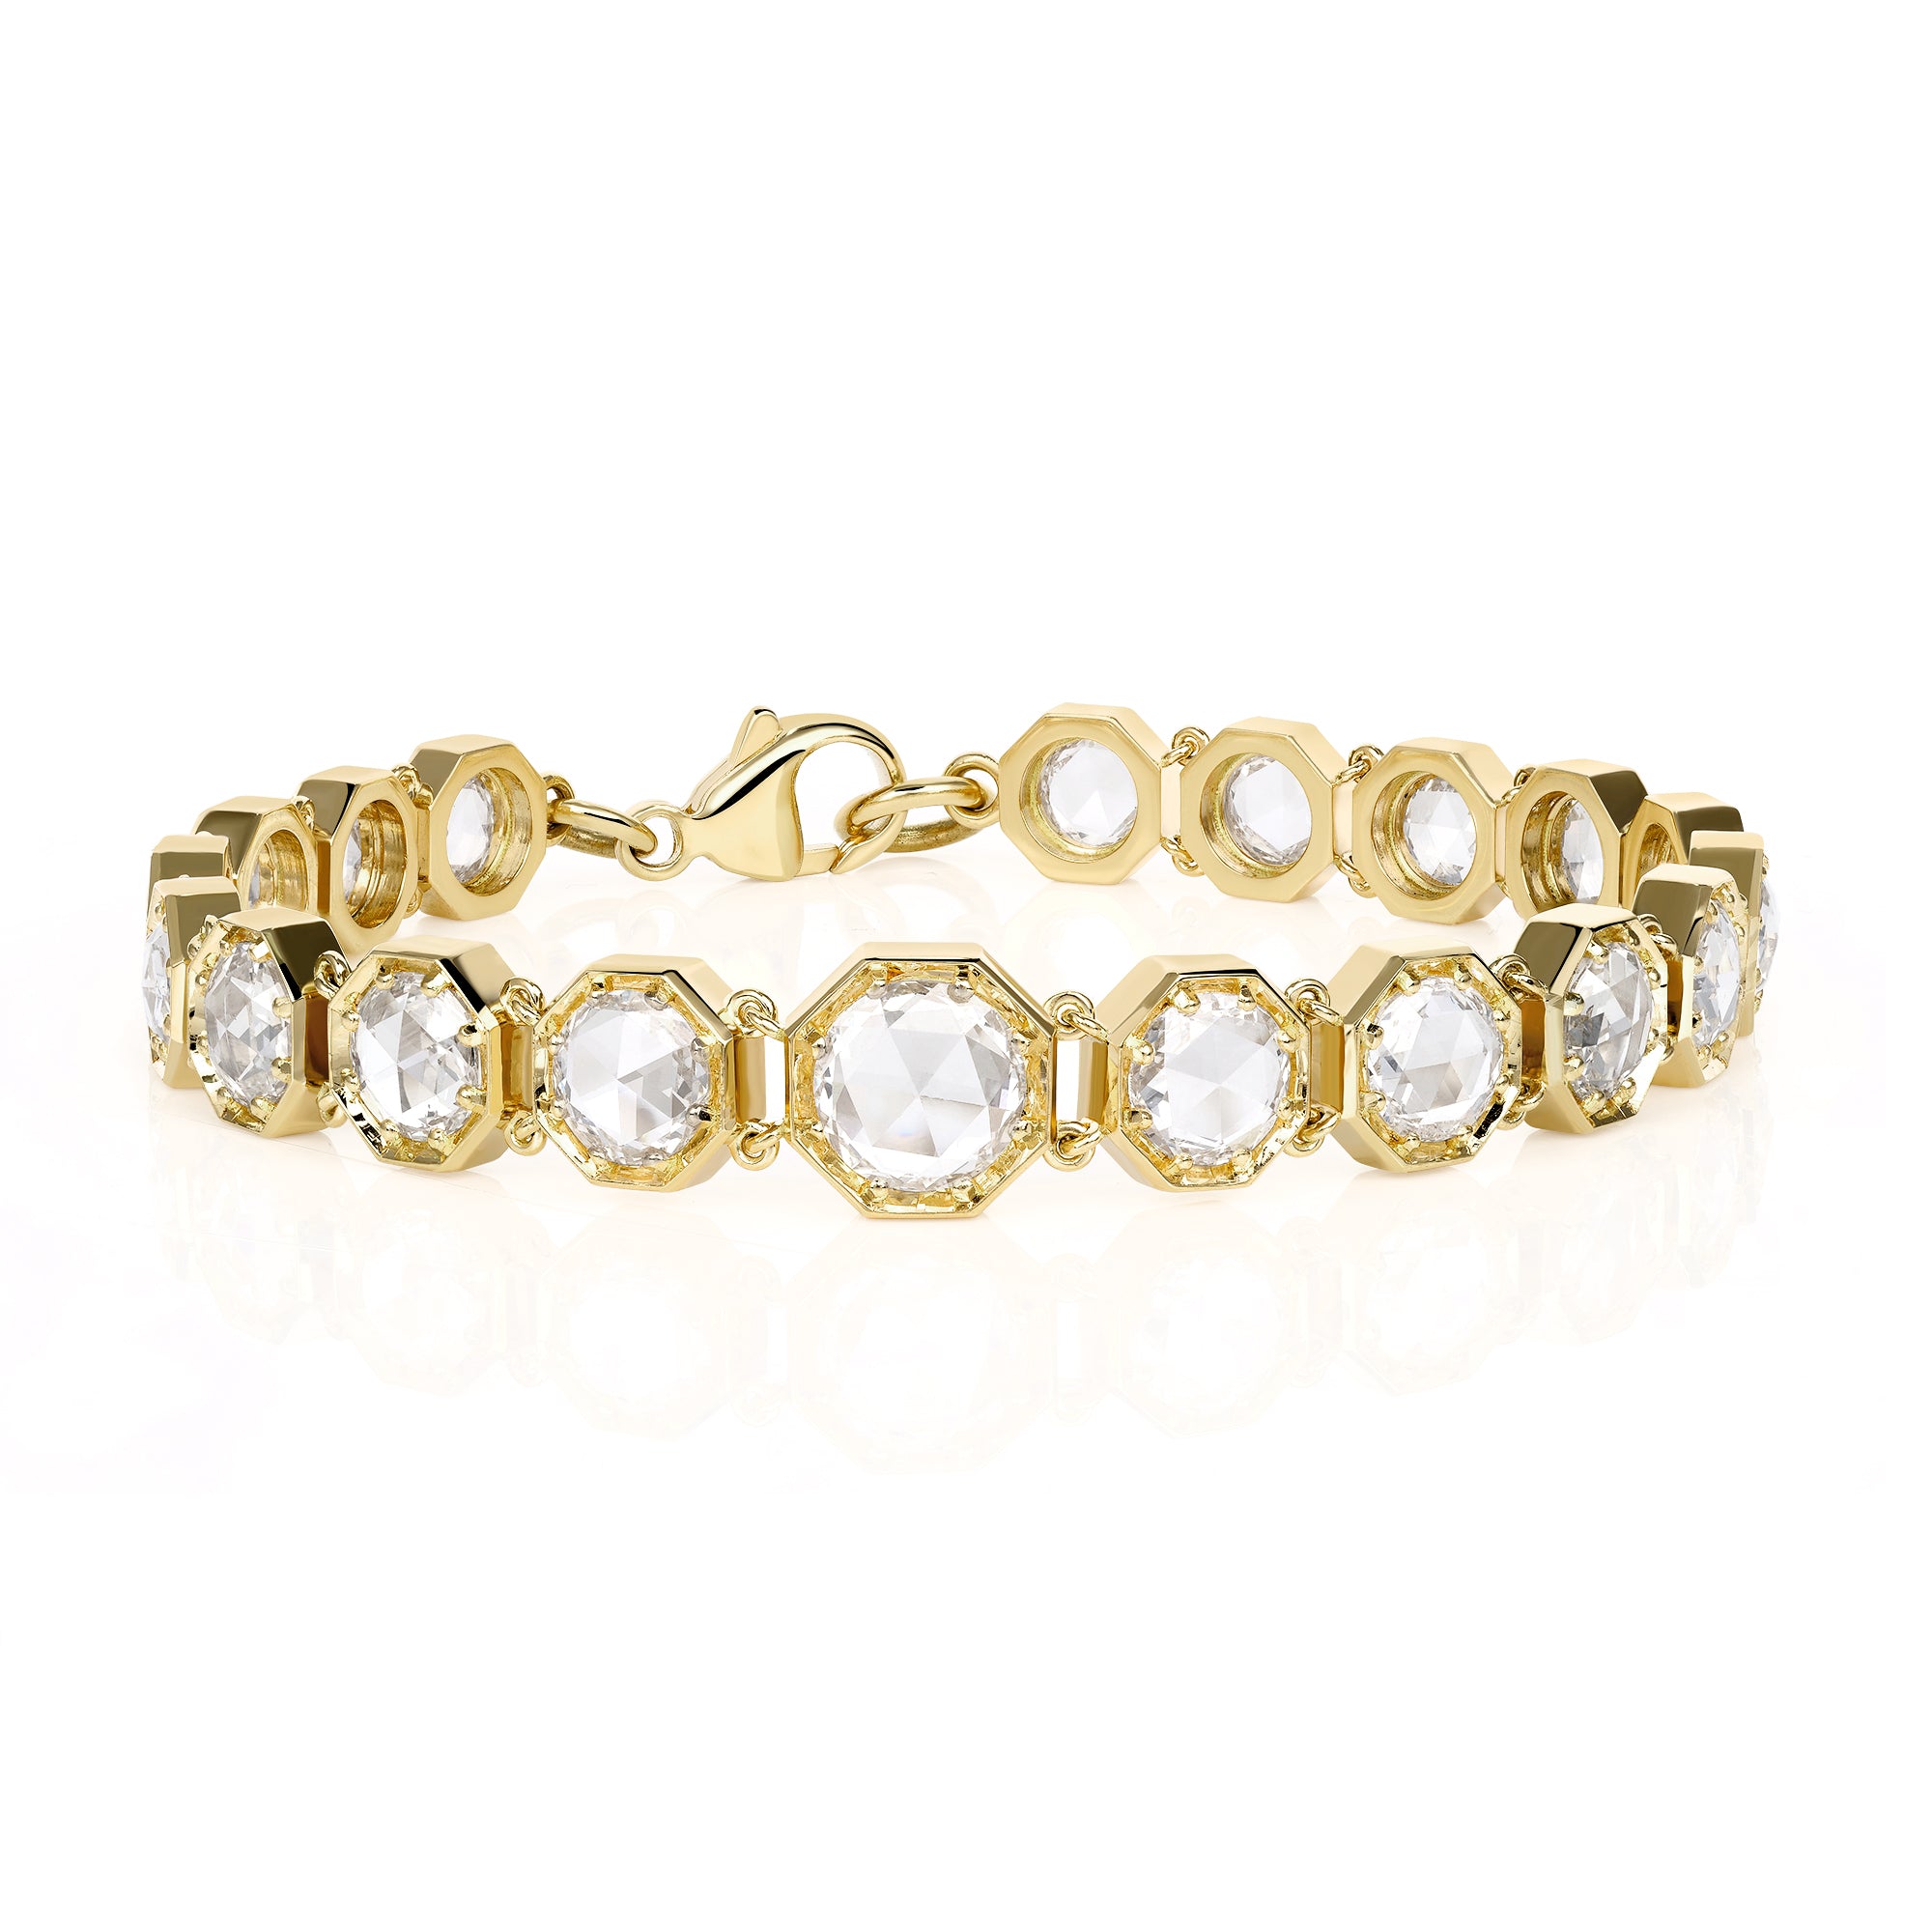 SINGLE STONE COLBY BRACELET featuring 1.10ct I/SI2 GIA certified round rose cut diamond accompanied by 7.94ctw round rose cut diamonds prong set in a handcrafted 18K yellow gold bracelet. Bracelet measures 7.5".